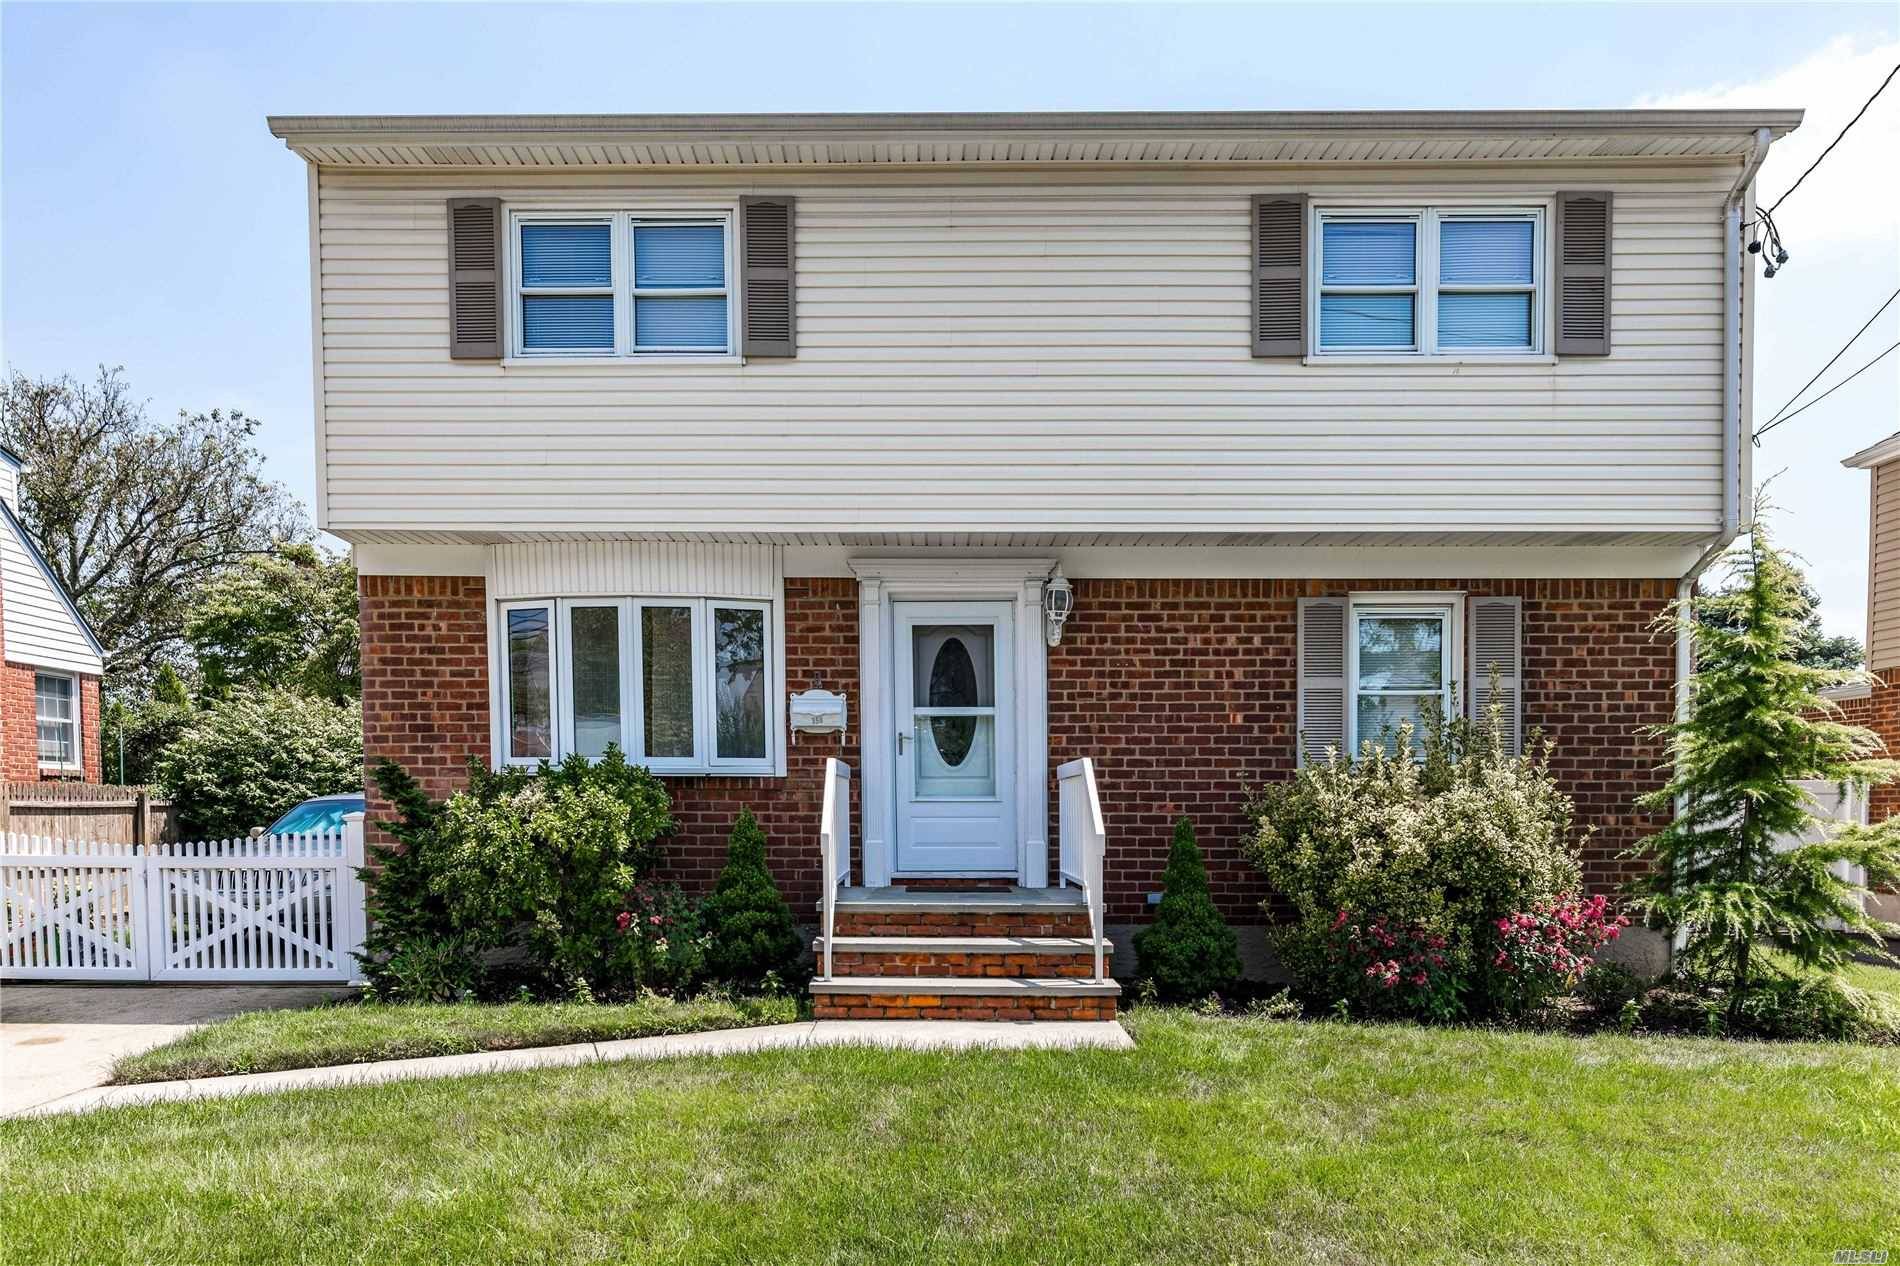 WELCOME TO THIS FIVE BEDROOM TWO BATH COLONIAL LOCATED IN THE HEART OF MINEOLA.